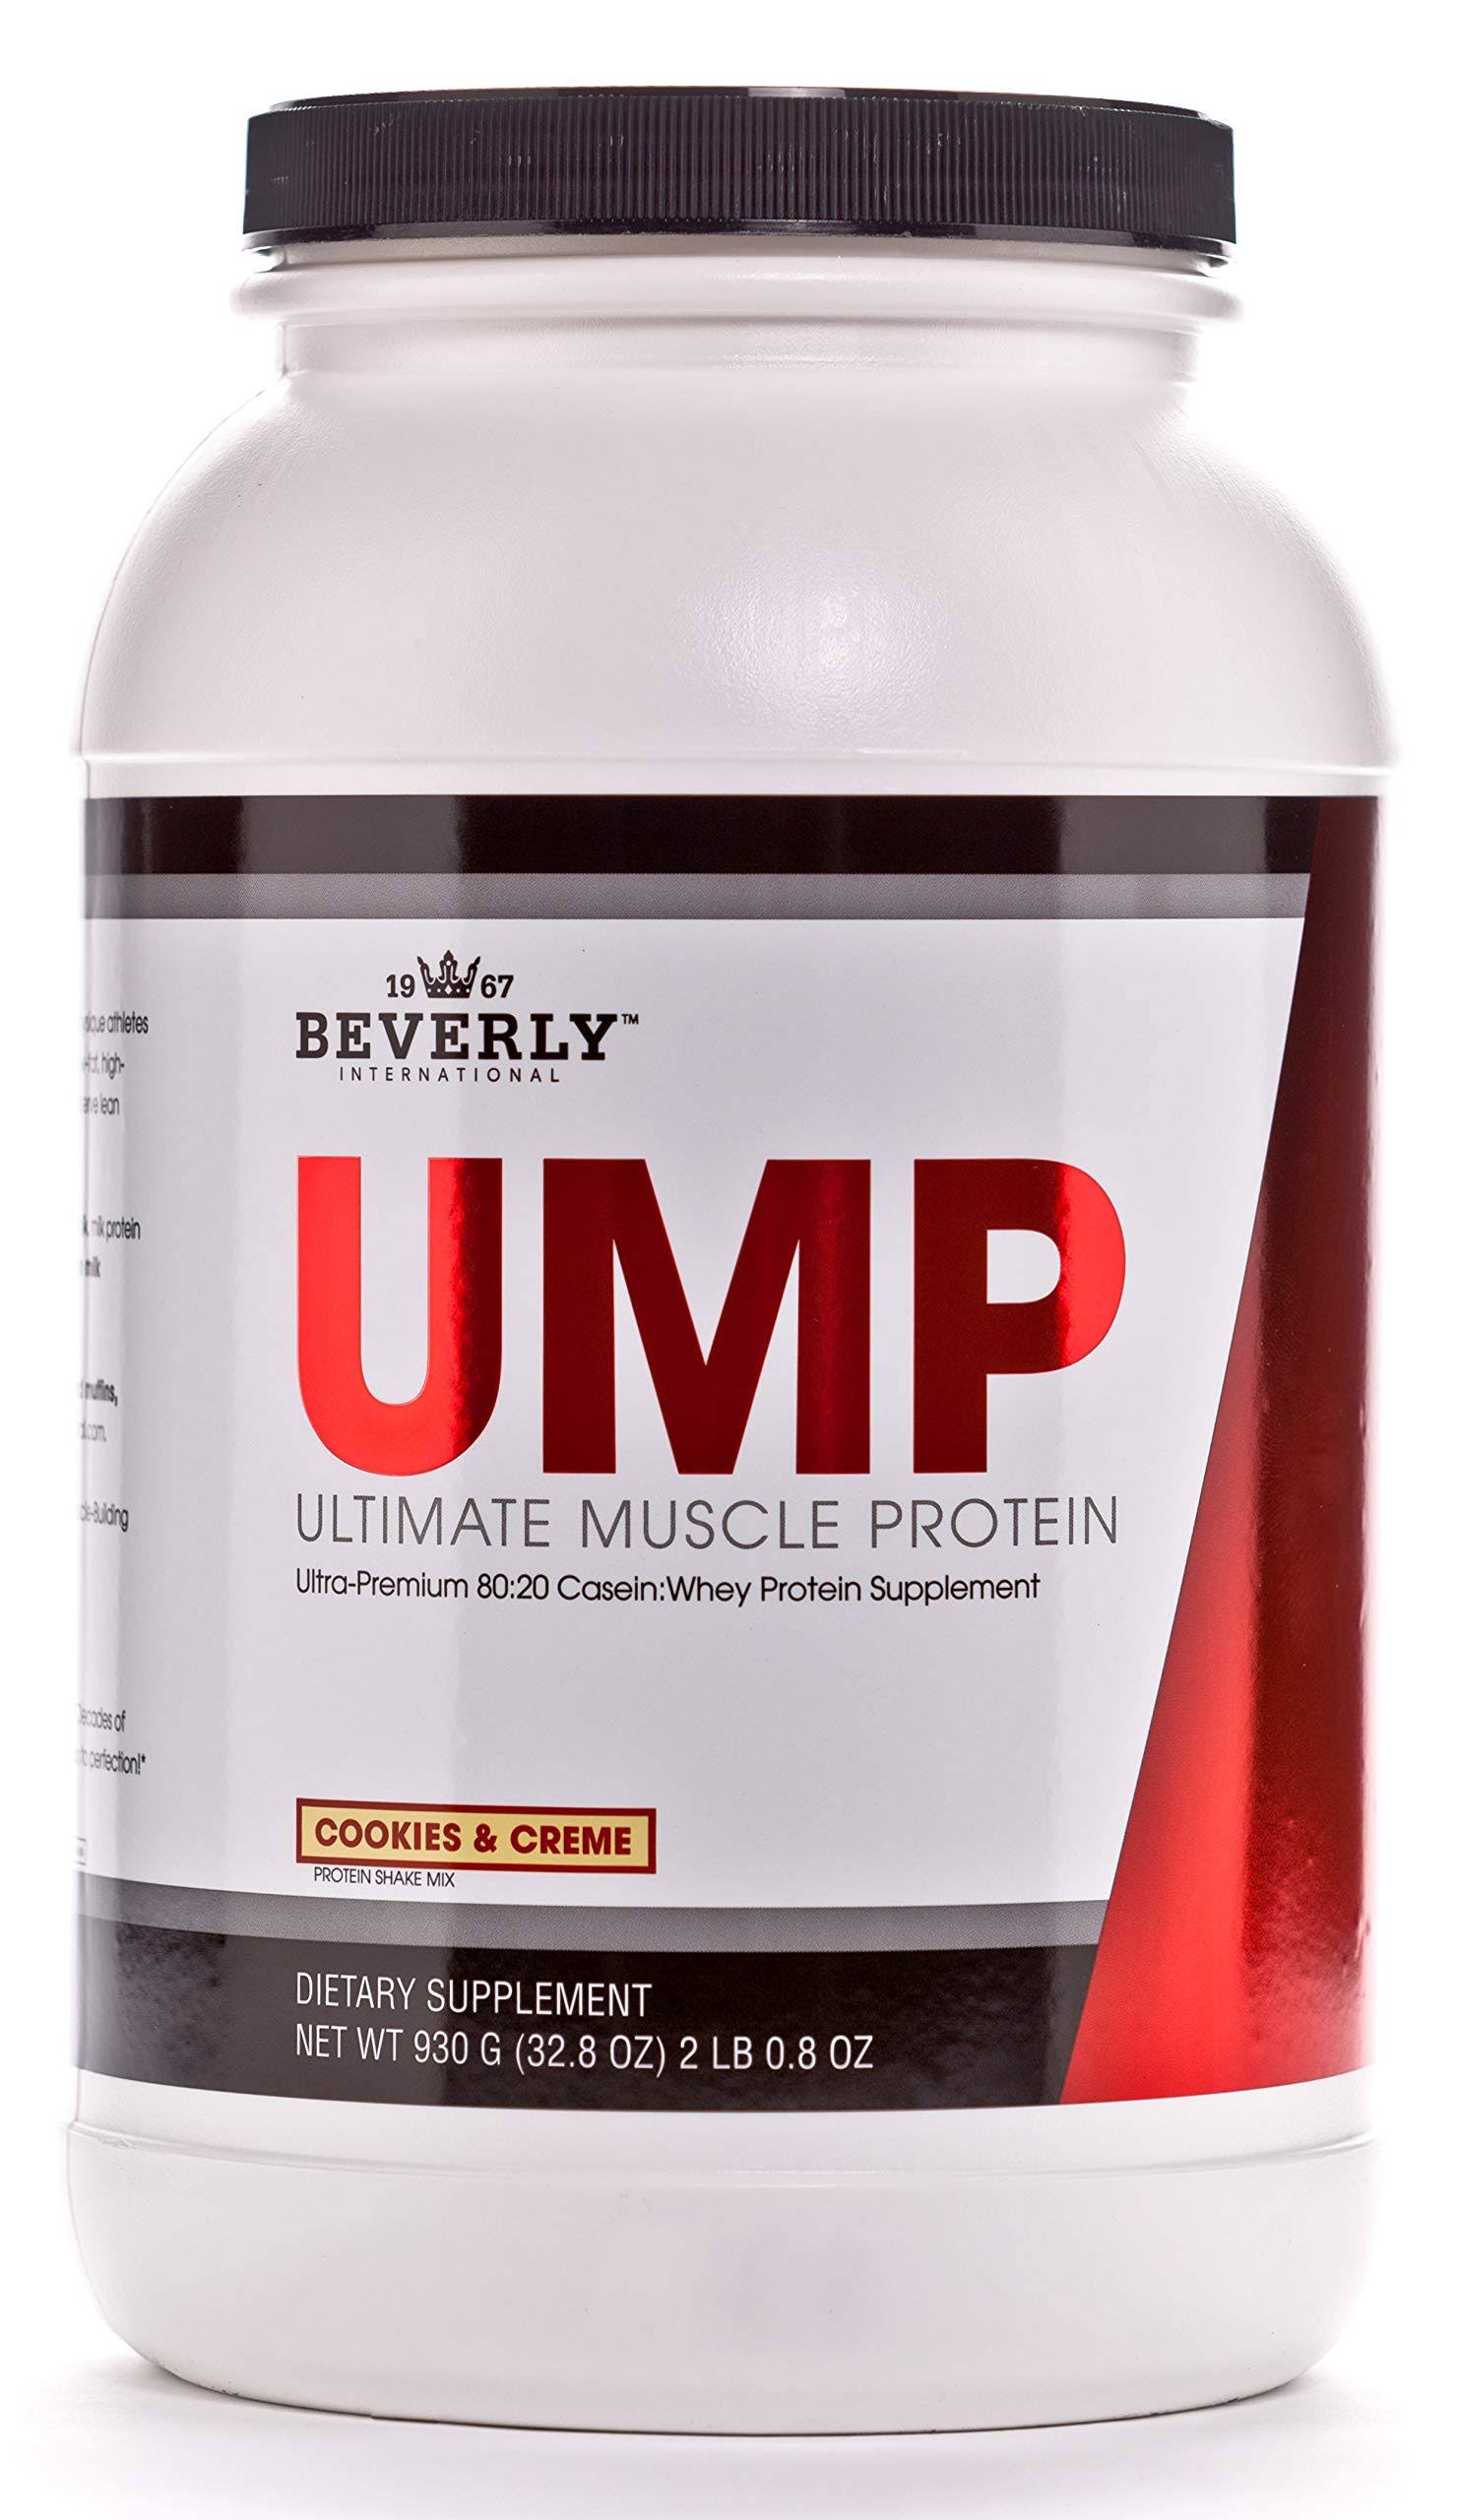 Beverly International UMP Ultimate Muscle Protein Powder - Cookies & Creme, 32.8 Oz